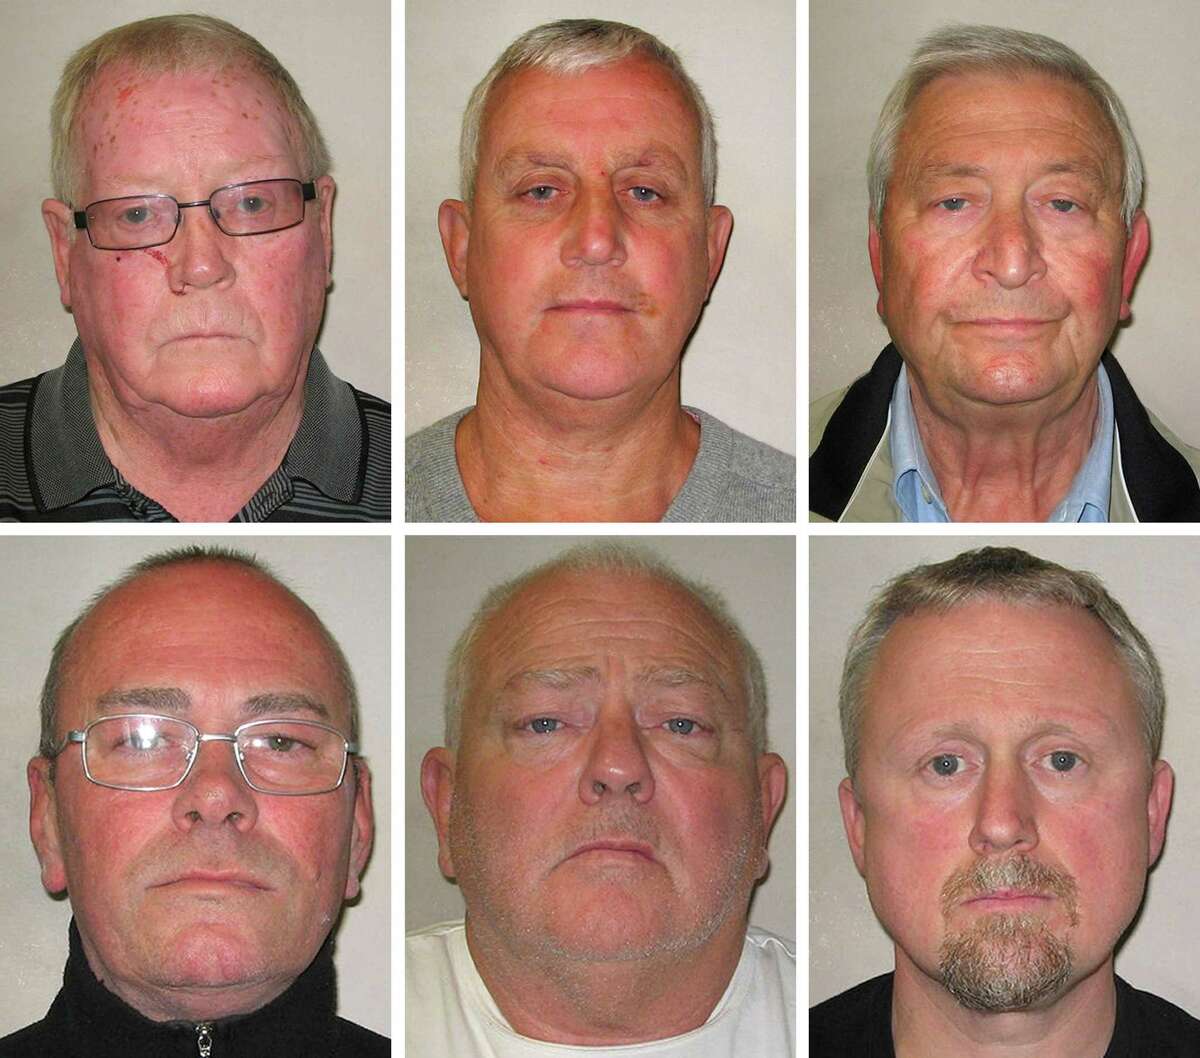 This undated Metropolitan Police handout photo shows, top row from left, John Collins, Daniel Jones and Terry Perkins, and bottom row from left, Carl Wood, William Lincoln and Hugh Doyle after their arrest in London. A British judge on Wednesday, March 9, 2016 sentenced six men who stole cash, jewelry and gold worth 14 million pounds ($20 million) from a vault in London’s diamond district to up to seven years in prison. The mostly elderly gang drilled through a concrete vault wall in the Hatton Garden diamond district in April and ransacked more than 70 safe-deposit boxes in a heist that has been described as the largest burglary in English legal history. Five of the men were sentenced at the Woolwich Crown Court to prison terms of six or seven years, while the sixth received a suspended sentence for his lesser role in “concealing, converting or transferring criminal property” related to the heist. (Metropolitan Police via AP)